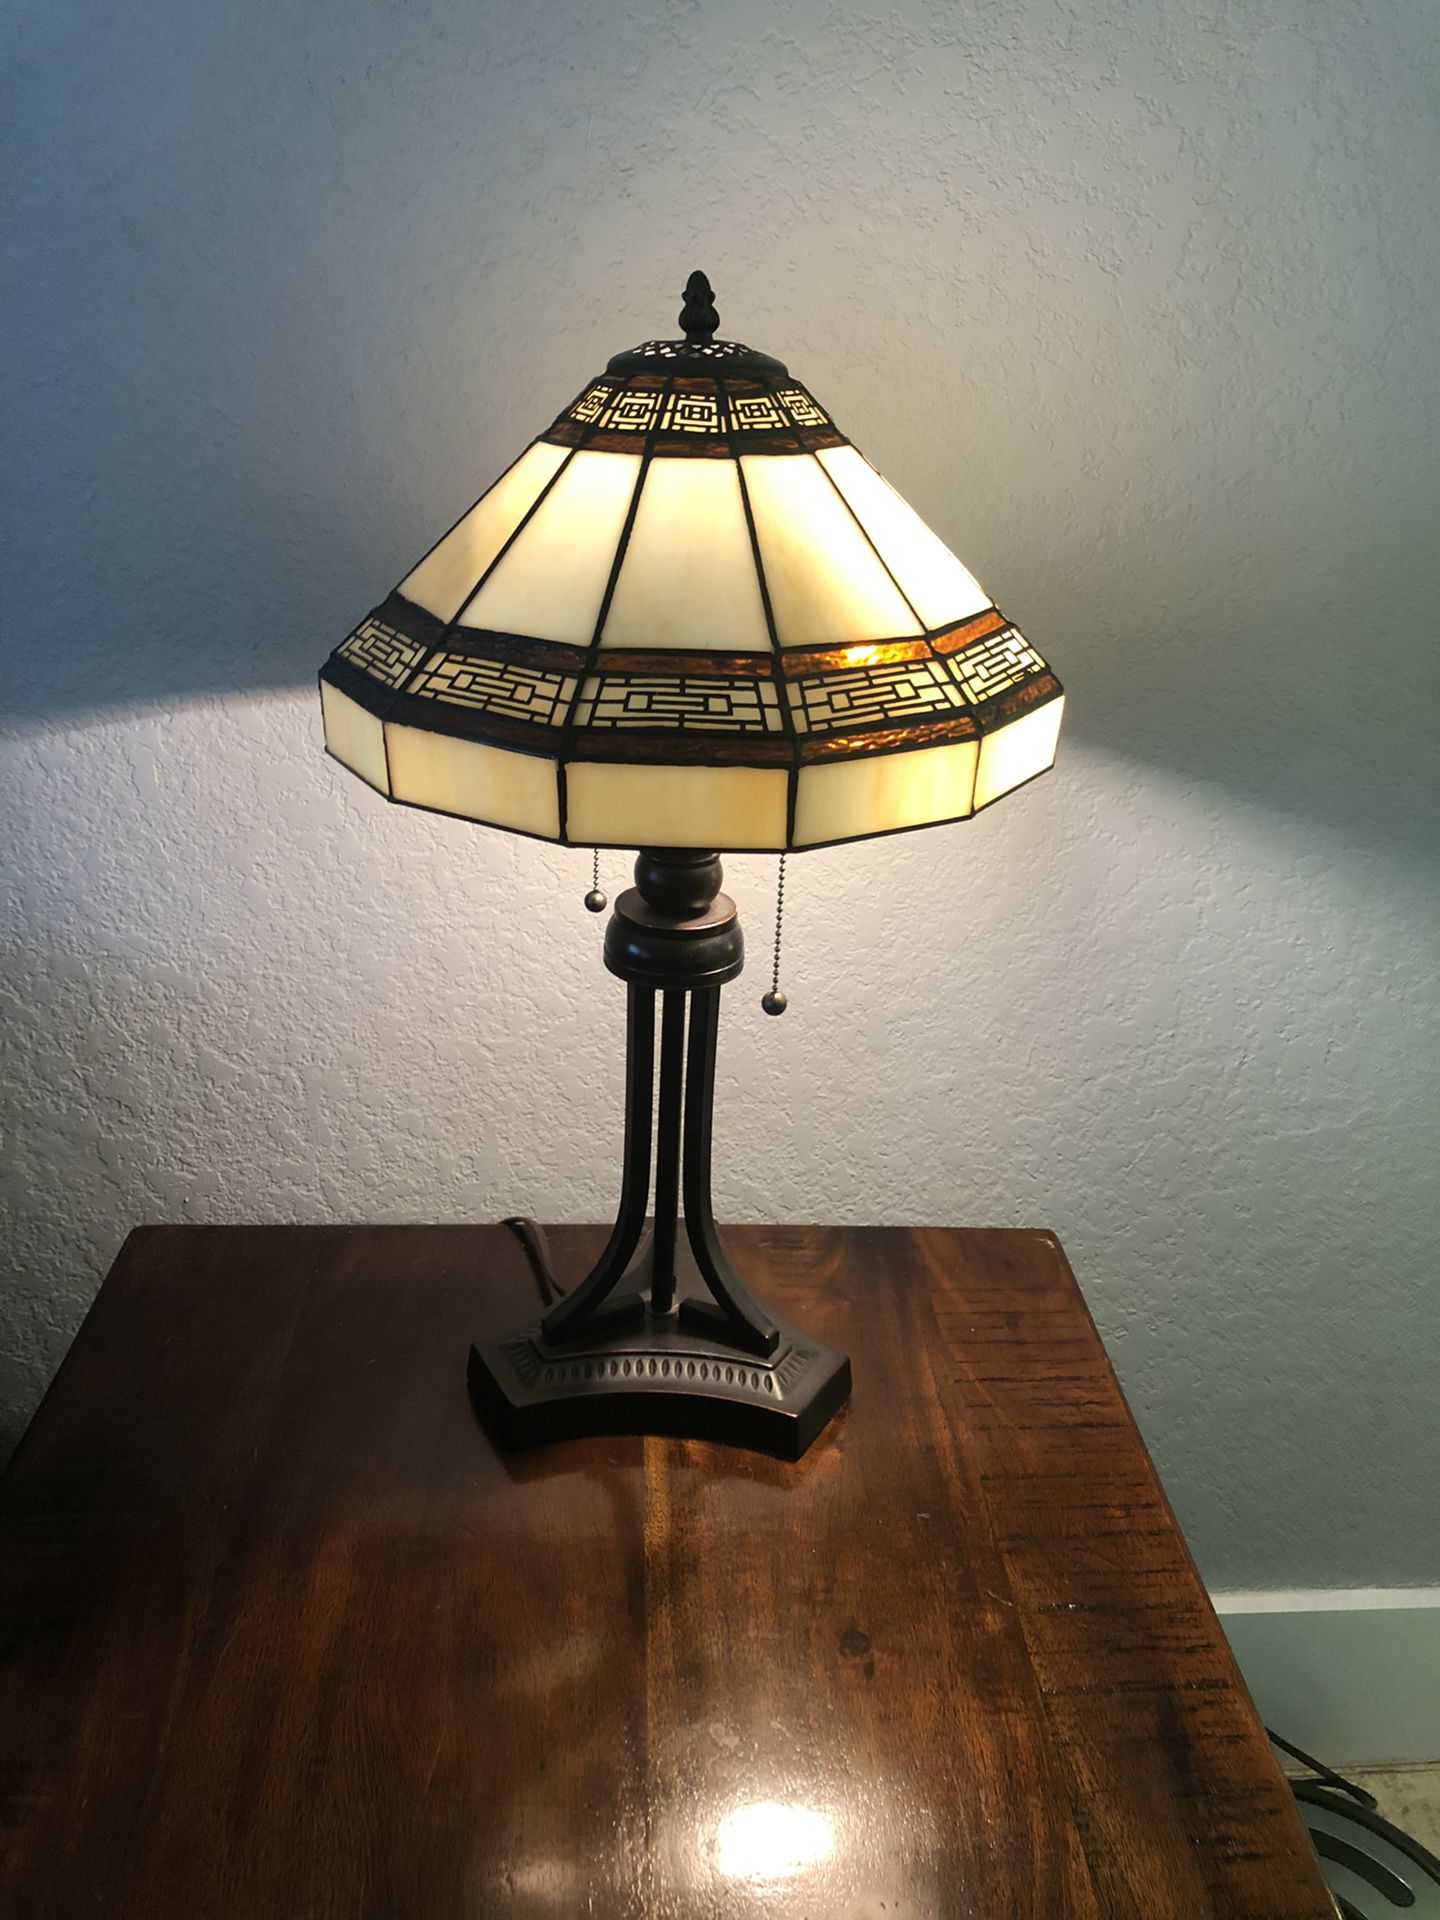 Matching set of oil rubbed bronze colored lamps